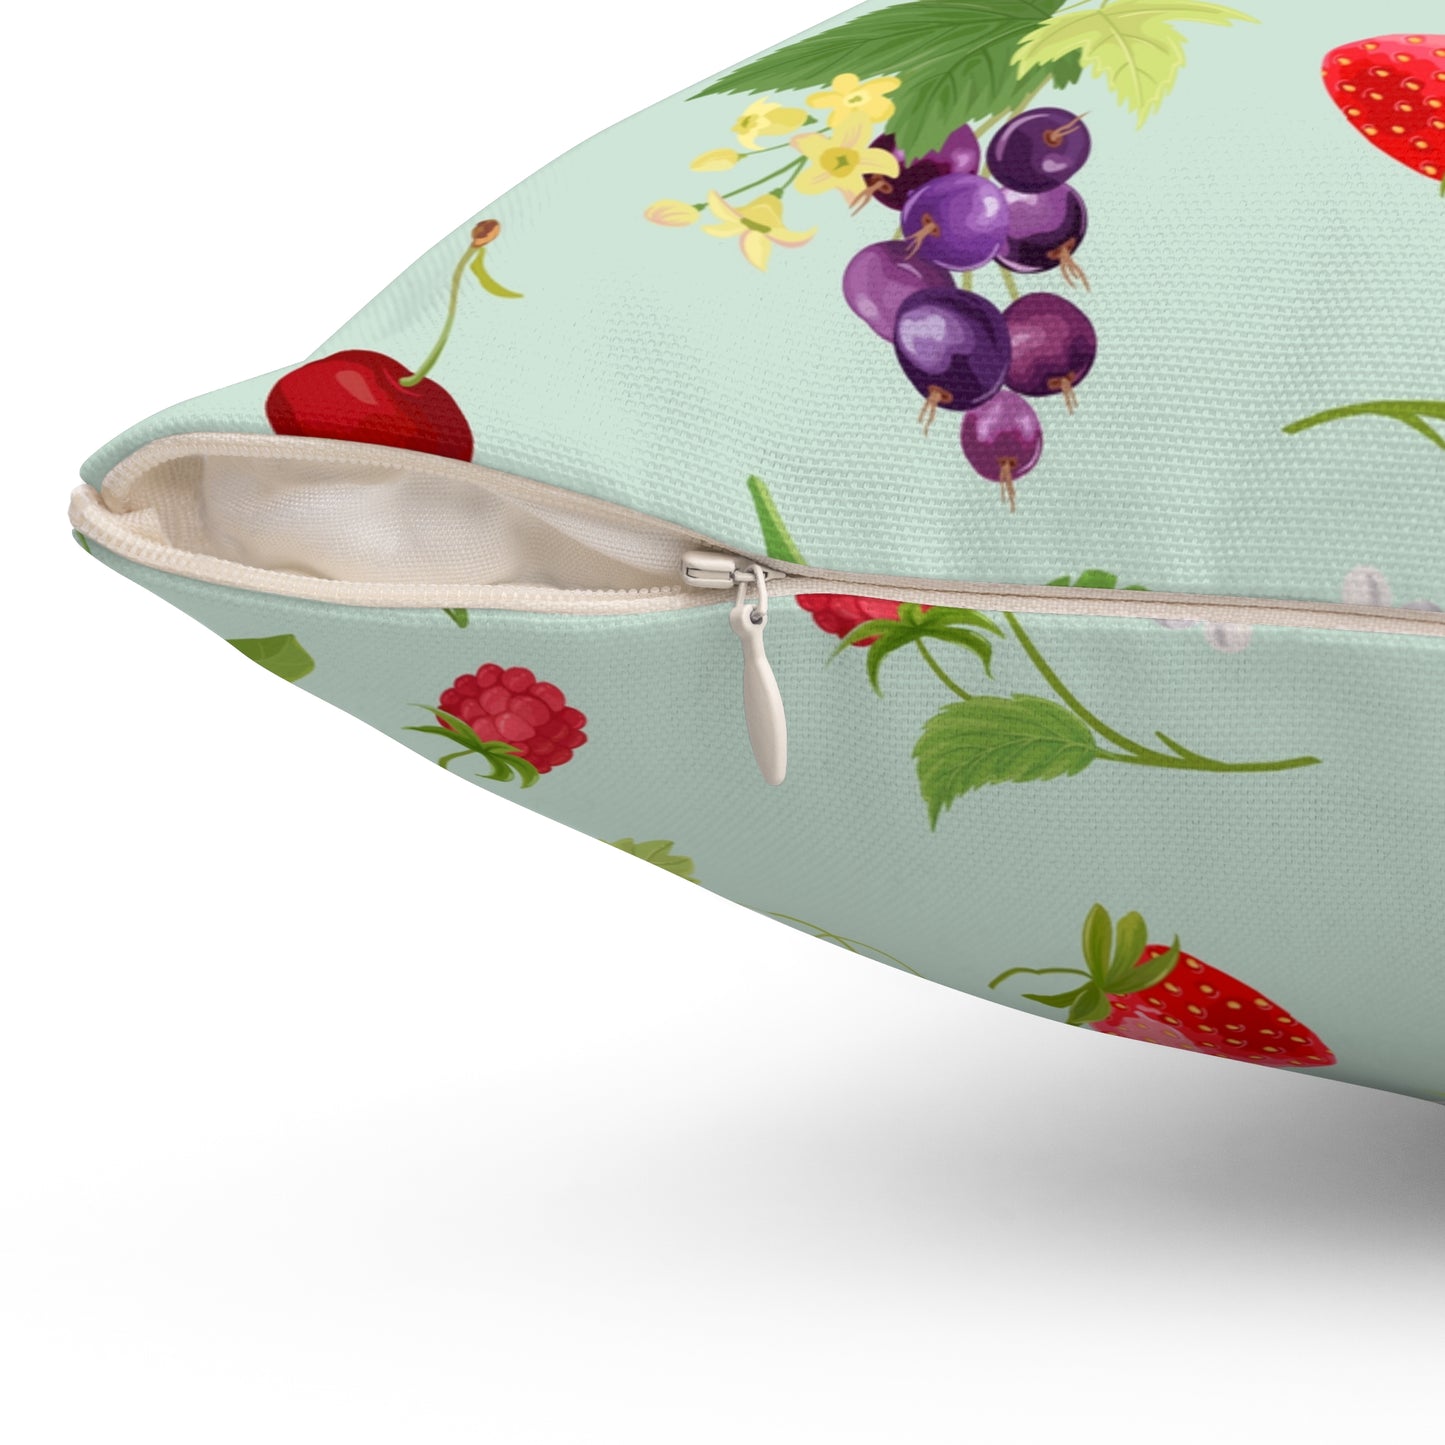 Cherries and Strawberries Spun Polyester Square Pillow